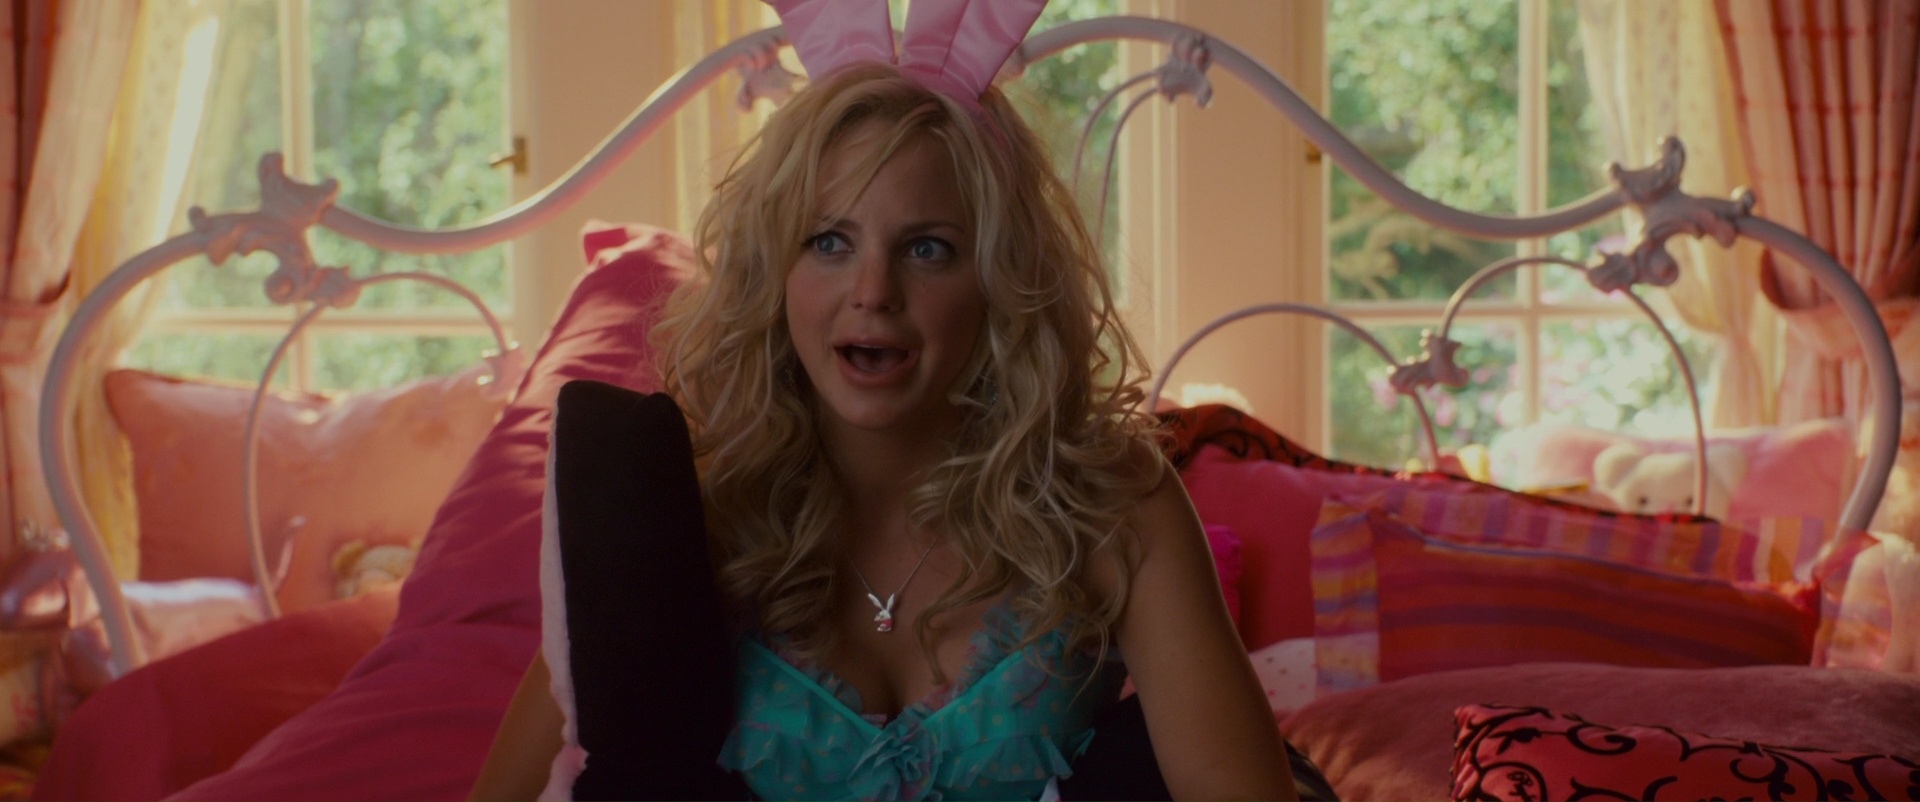 I analyzed a Movie and product placement was spotted: Playboy Necklace Worn...